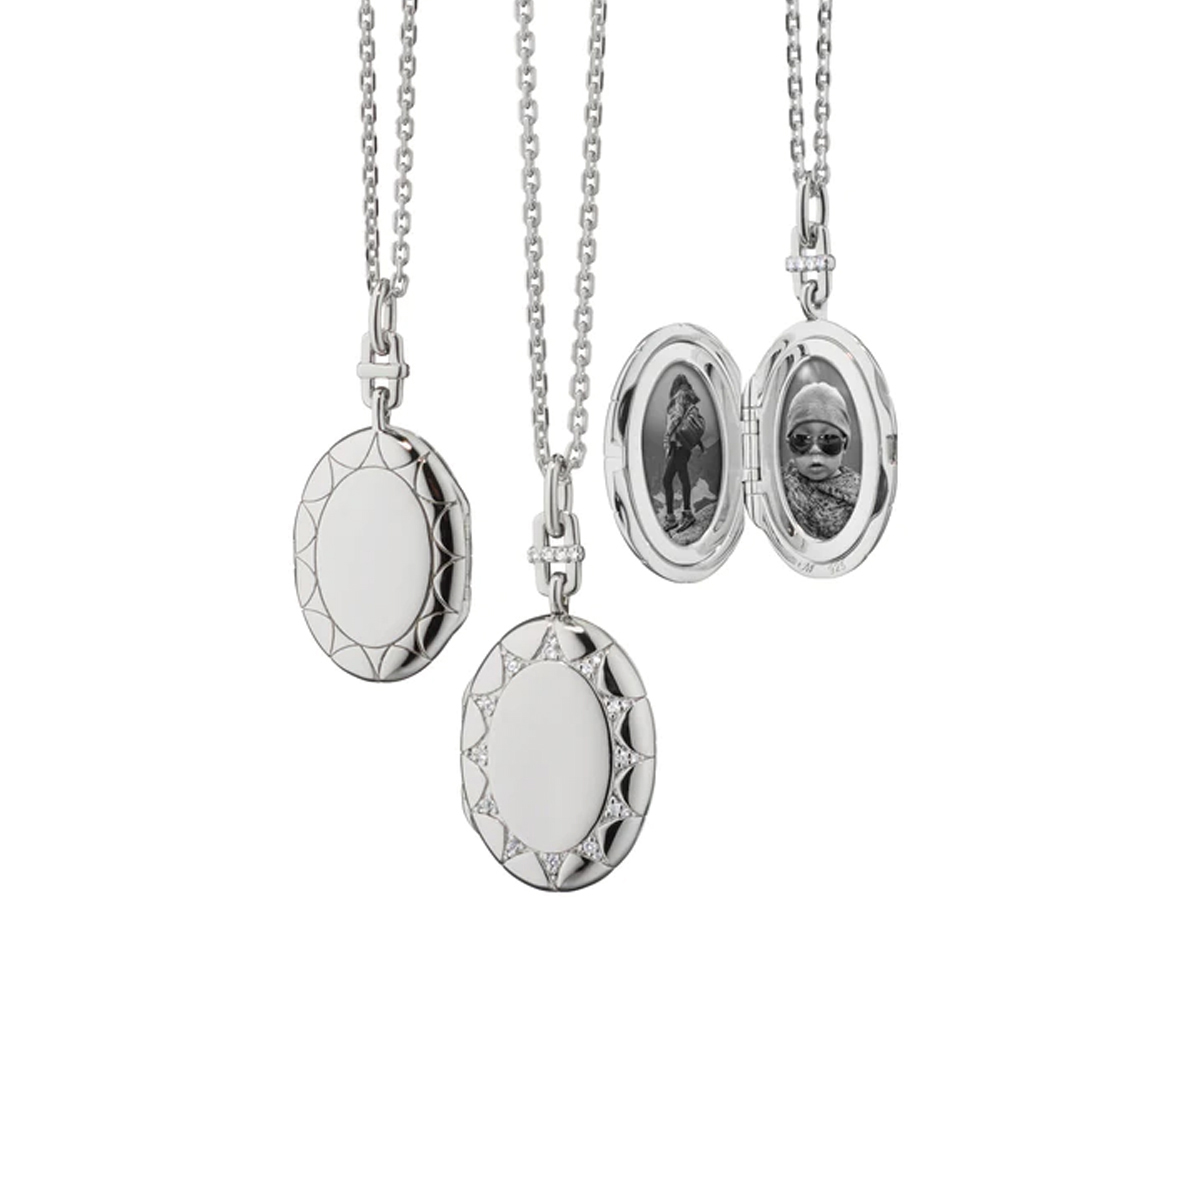 Sterling Silver "Isabella" Locket with Chain